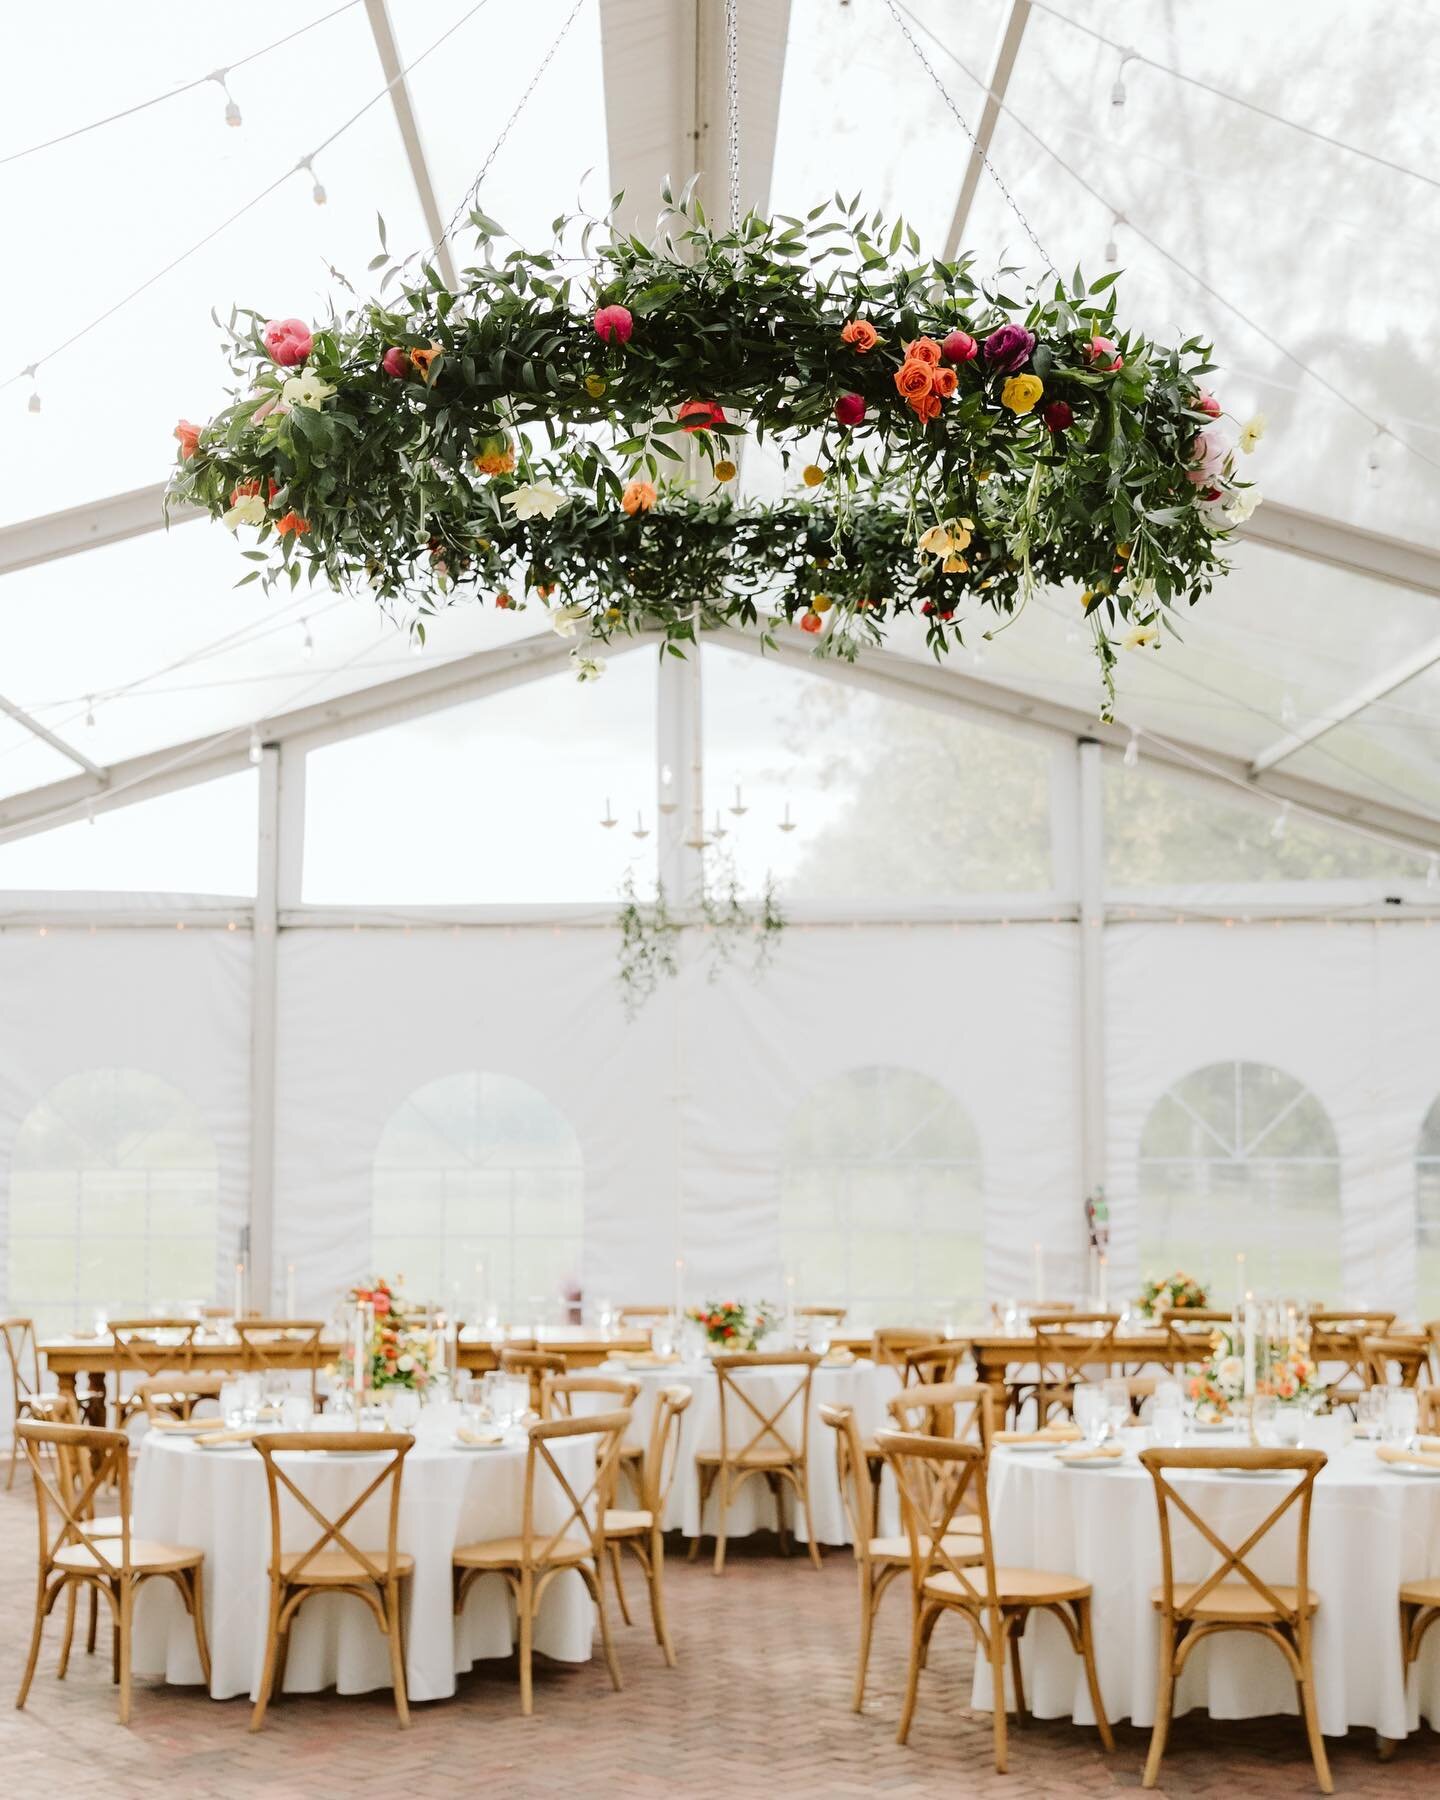 Lots of greenery and bright florals, and the beautiful clear top tent at @fernbrook.farms 🌿